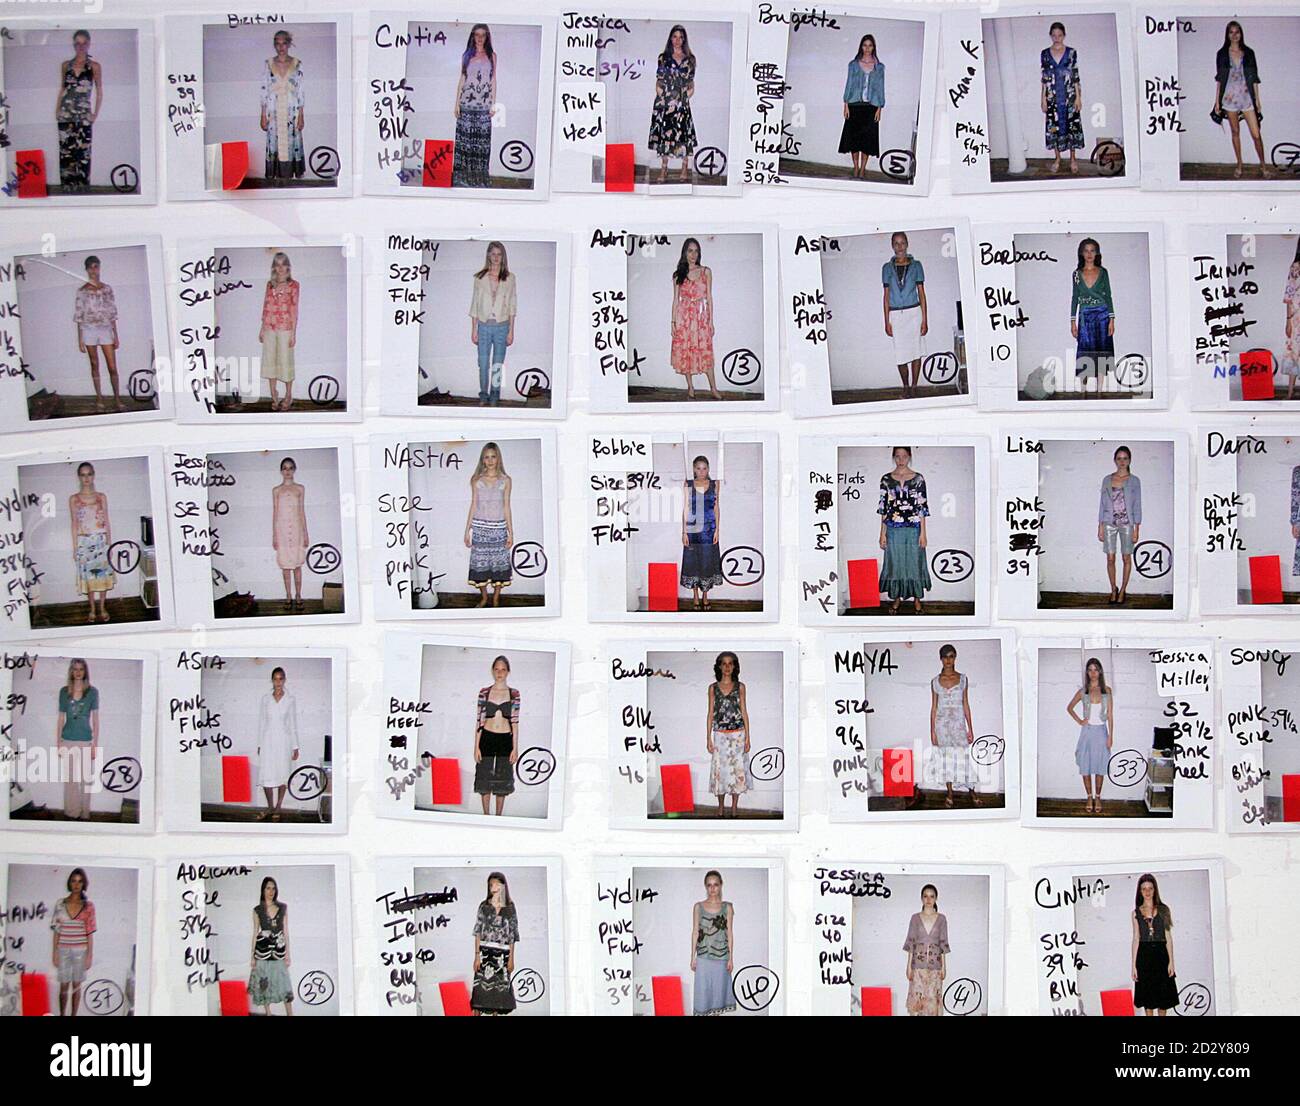 Polaroid photographs of models and their different "looks" are displayed  backstage at Fashion Week in New York City. Polaroid photographs of models  and their different "looks" are displayed backstage before the Twinkle